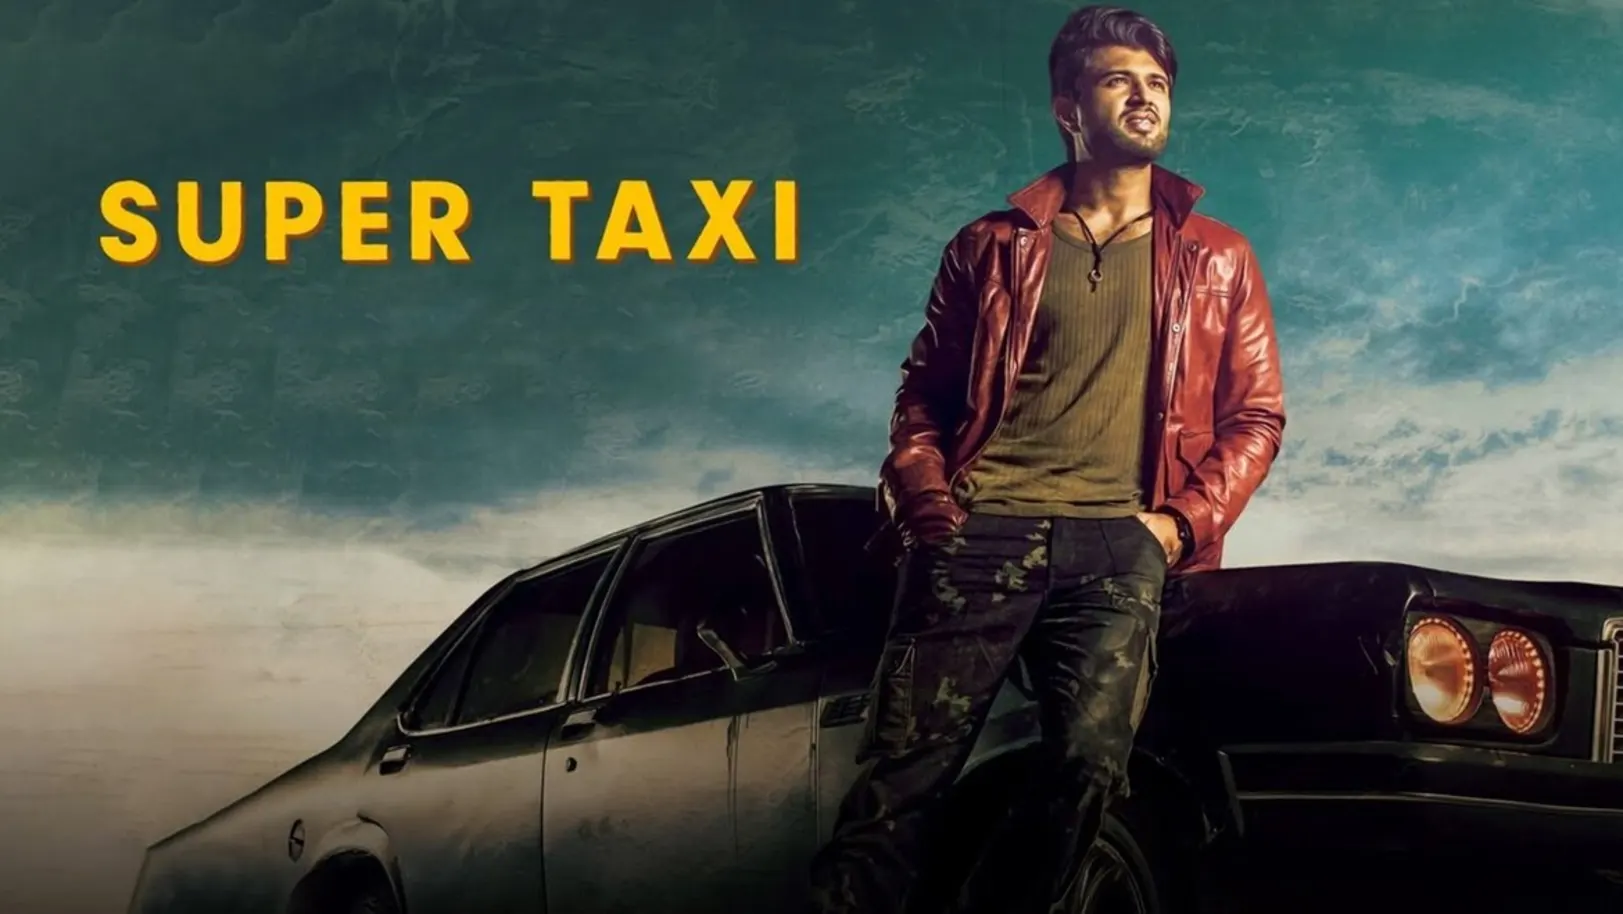 Super Taxi Streaming Now On Zee Ganga